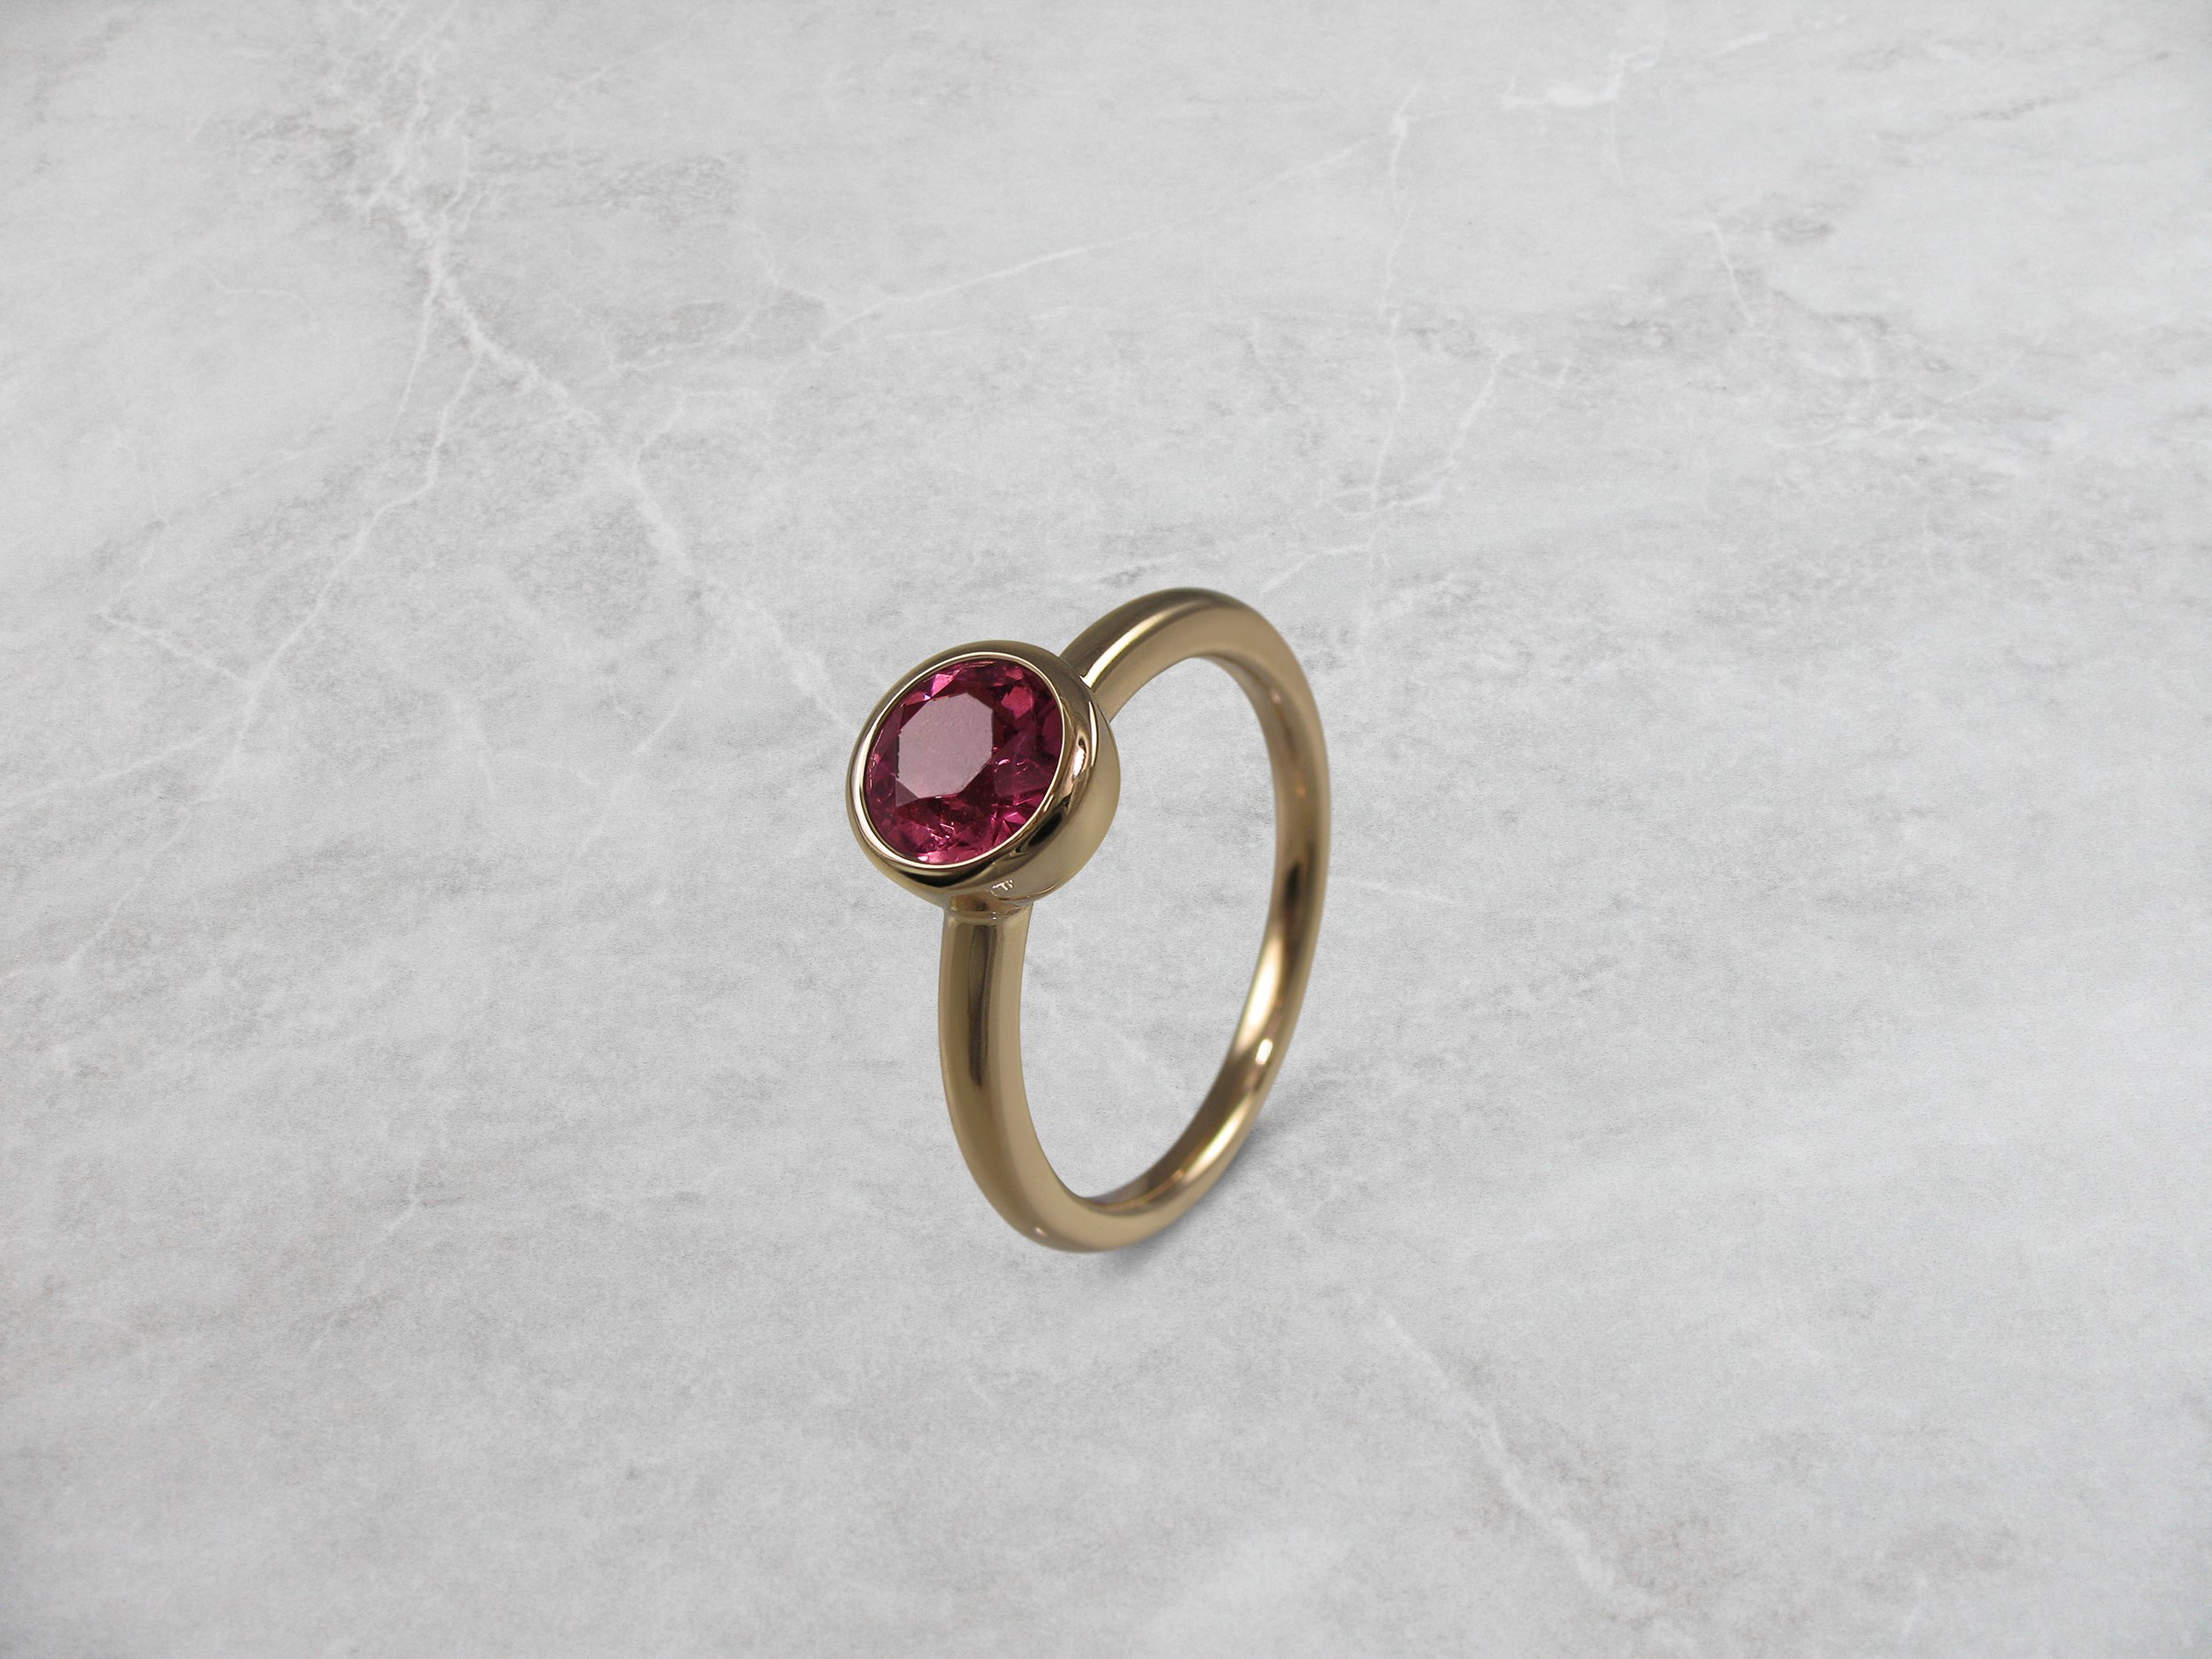 Red tourmaline and gold dress ring